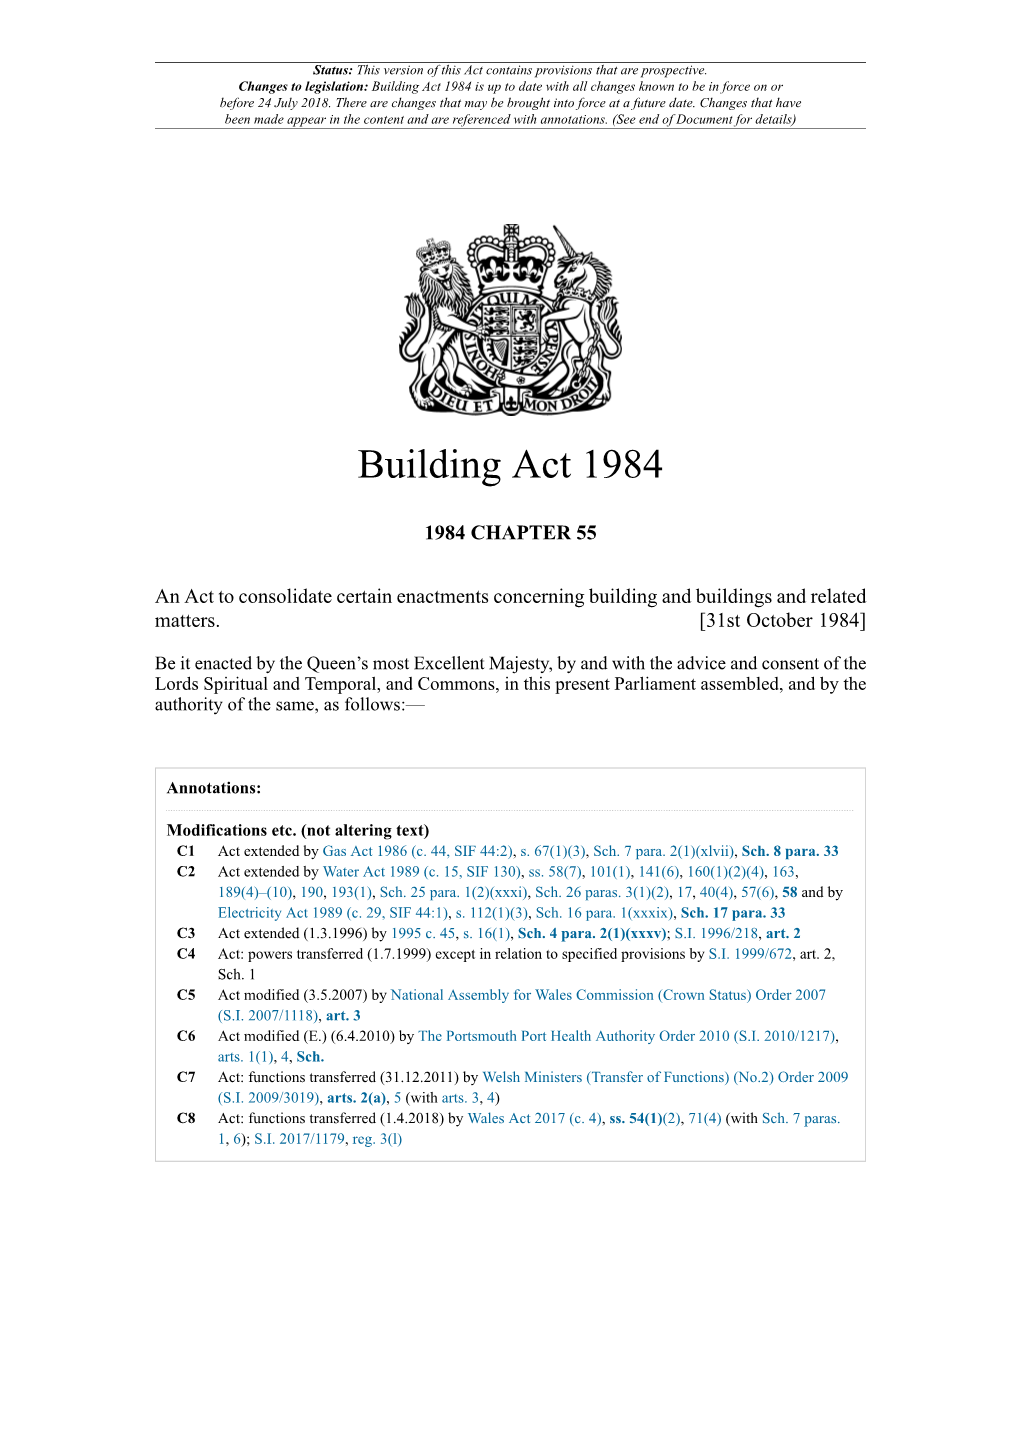 Building Act 1984 Is up to Date with All Changes Known to Be in Force on Or Before 24 July 2018